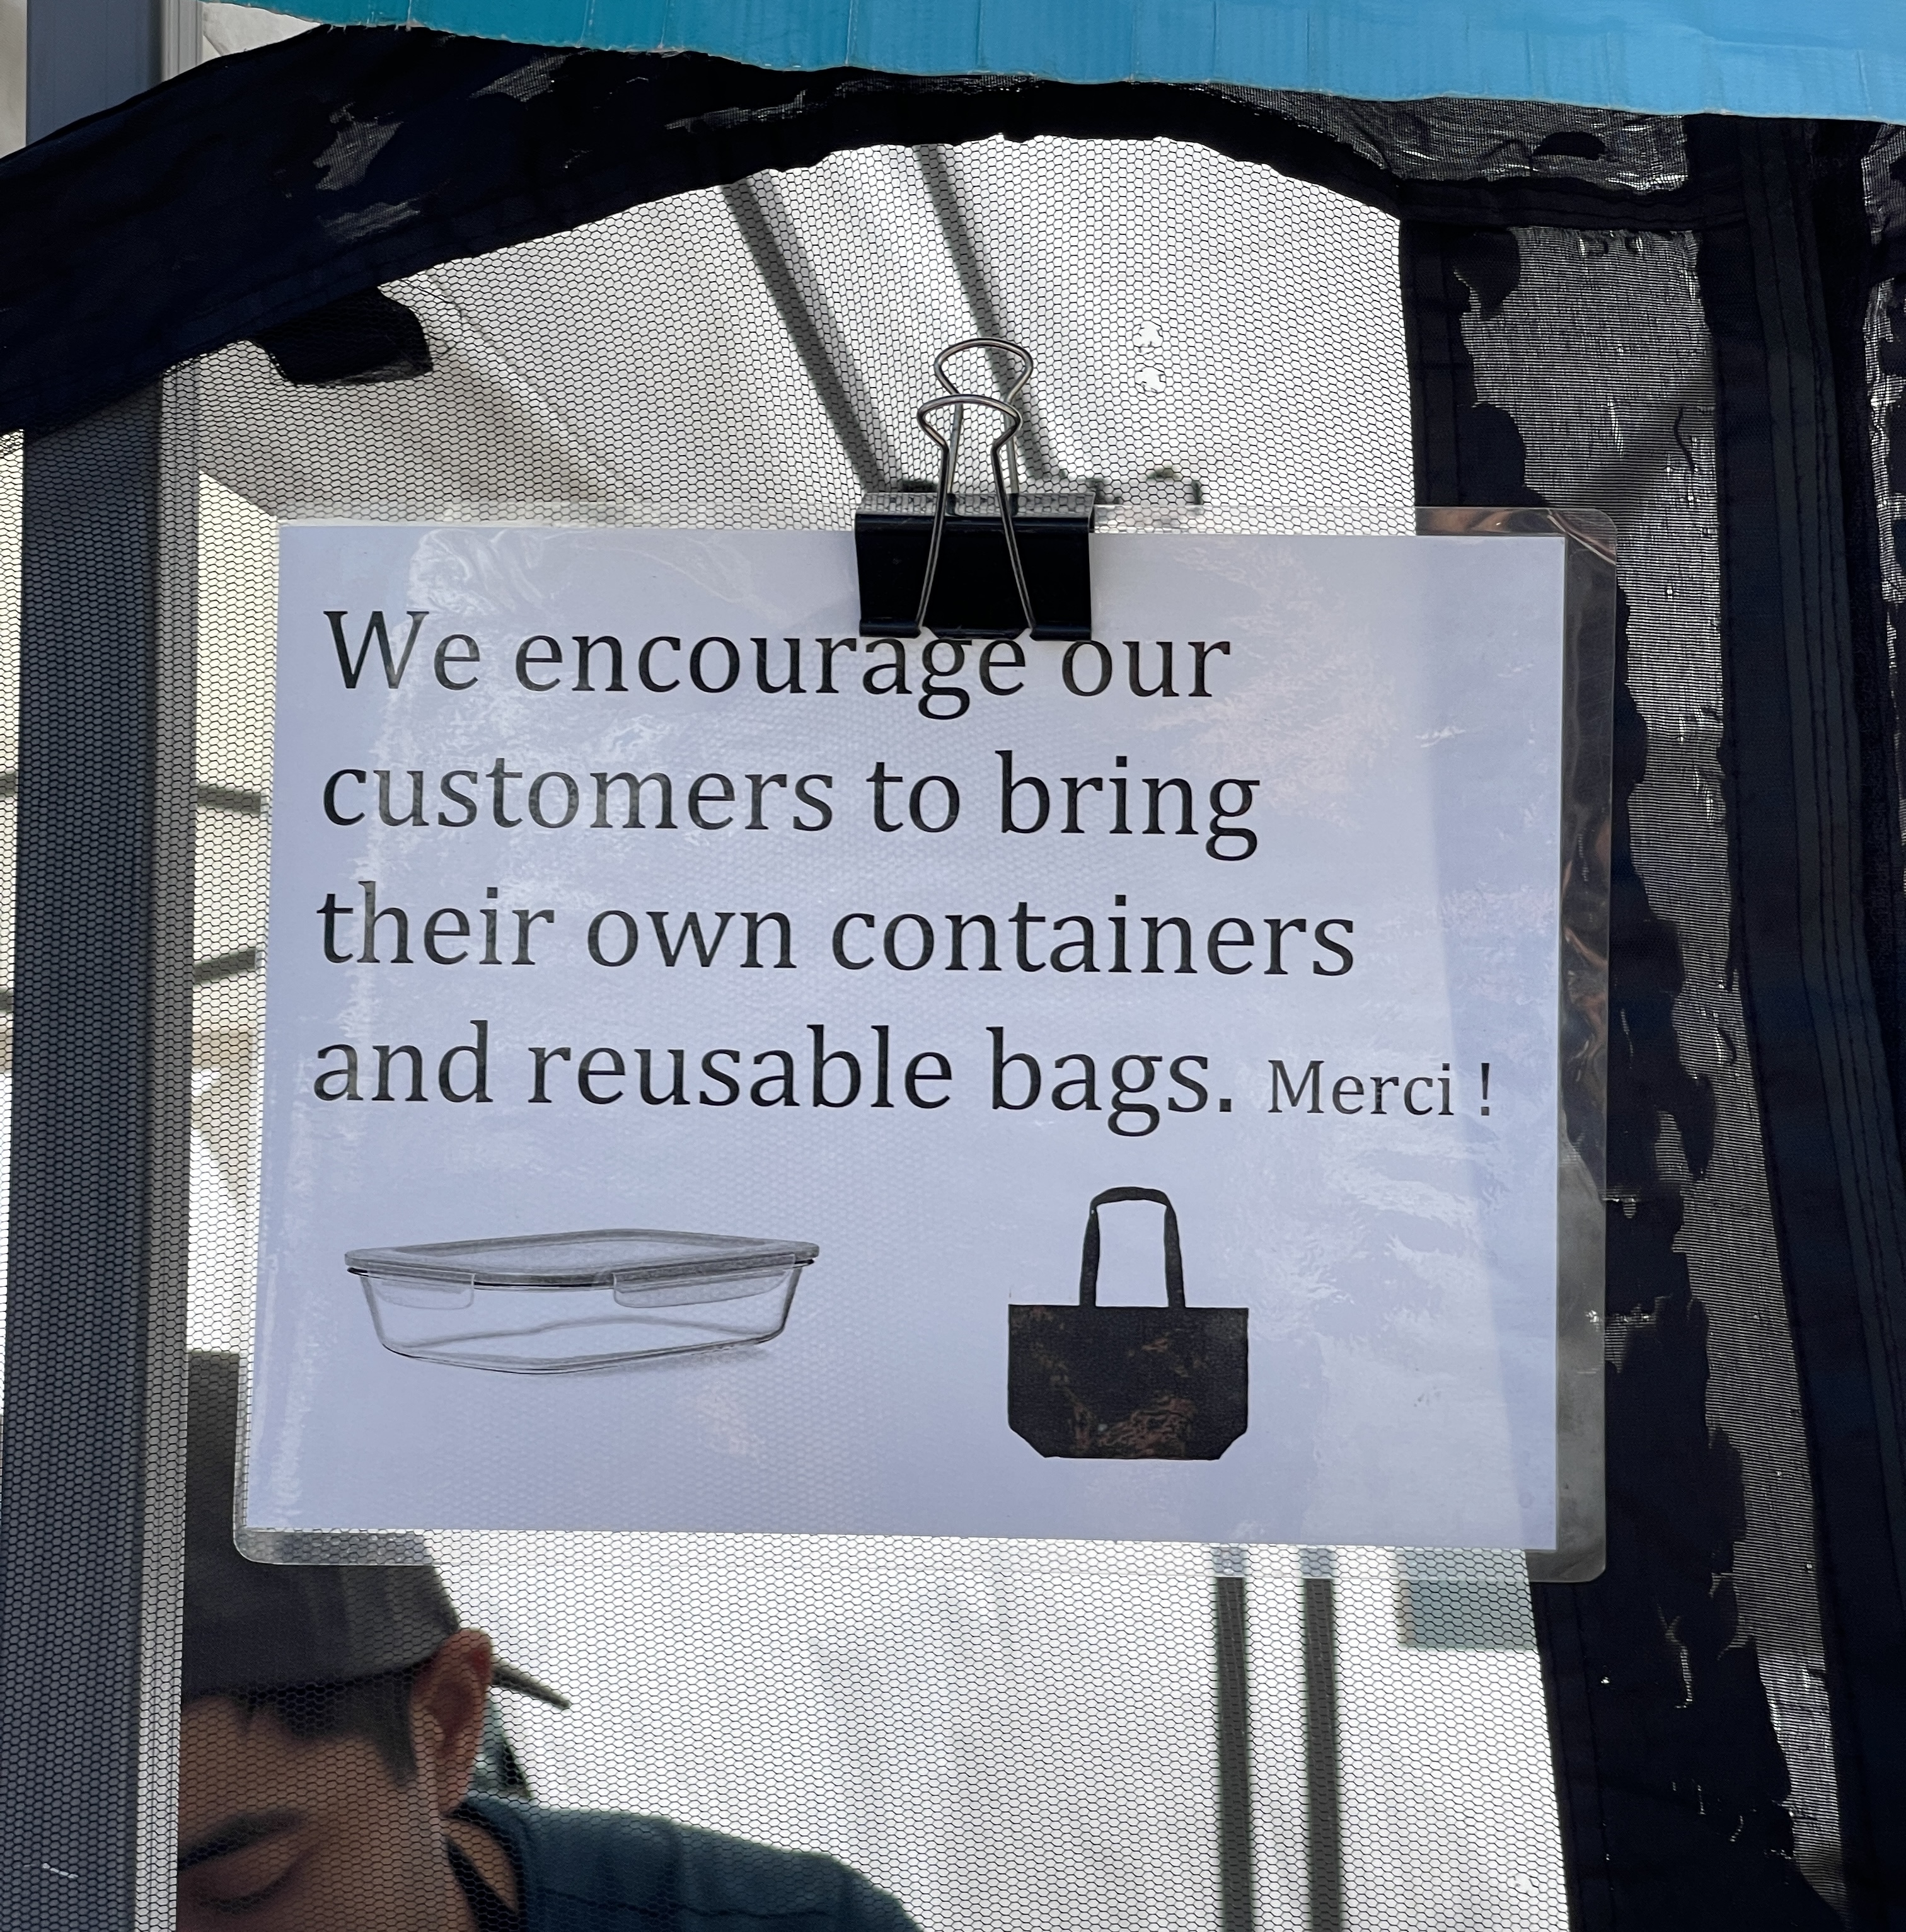 A sign asking customers to BYO containers for their bakery purchases